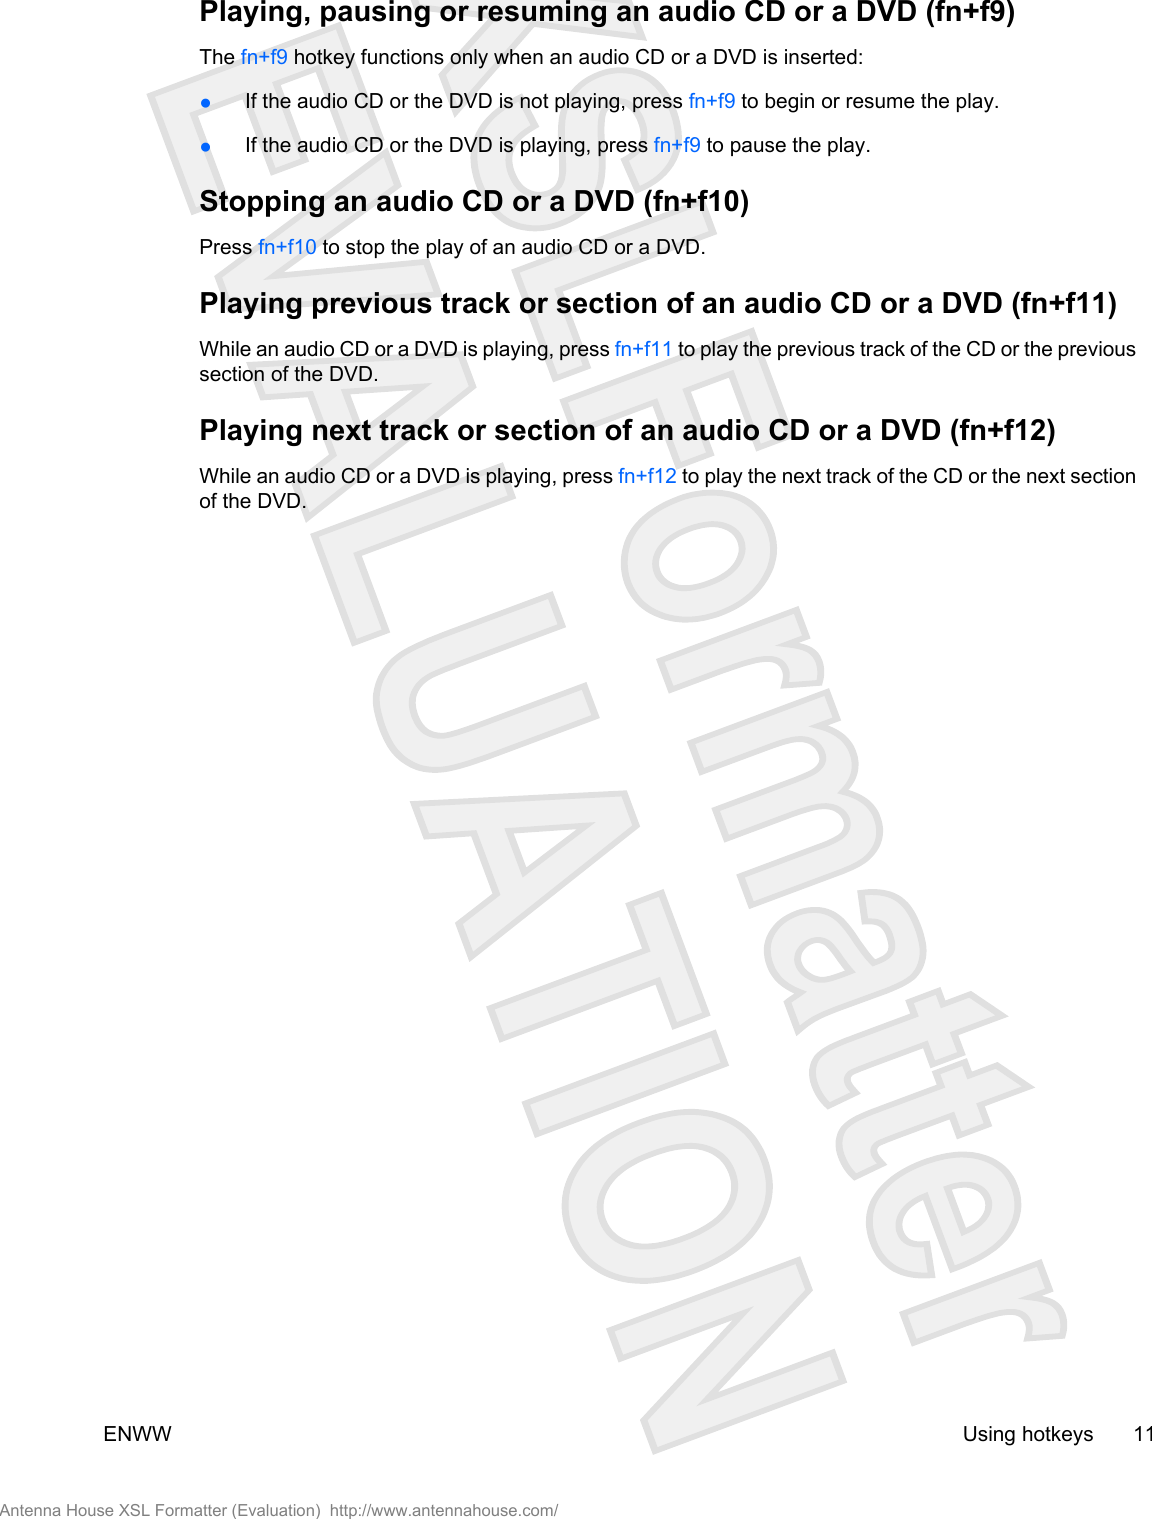 Playing, pausing or resuming an audio CD or a DVD (fn+f9)The fn+f9 hotkey functions only when an audio CD or a DVD is inserted:●If the audio CD or the DVD is not playing, press fn+f9 to begin or resume the play.●If the audio CD or the DVD is playing, press fn+f9 to pause the play.Stopping an audio CD or a DVD (fn+f10)Press fn+f10 to stop the play of an audio CD or a DVD.Playing previous track or section of an audio CD or a DVD (fn+f11)While an audio CD or a DVD is playing, press fn+f11 to play the previous track of the CD or the previoussection of the DVD.Playing next track or section of an audio CD or a DVD (fn+f12)While an audio CD or a DVD is playing, press fn+f12 to play the next track of the CD or the next sectionof the DVD.ENWW Using hotkeys 11Antenna House XSL Formatter (Evaluation)  http://www.antennahouse.com/